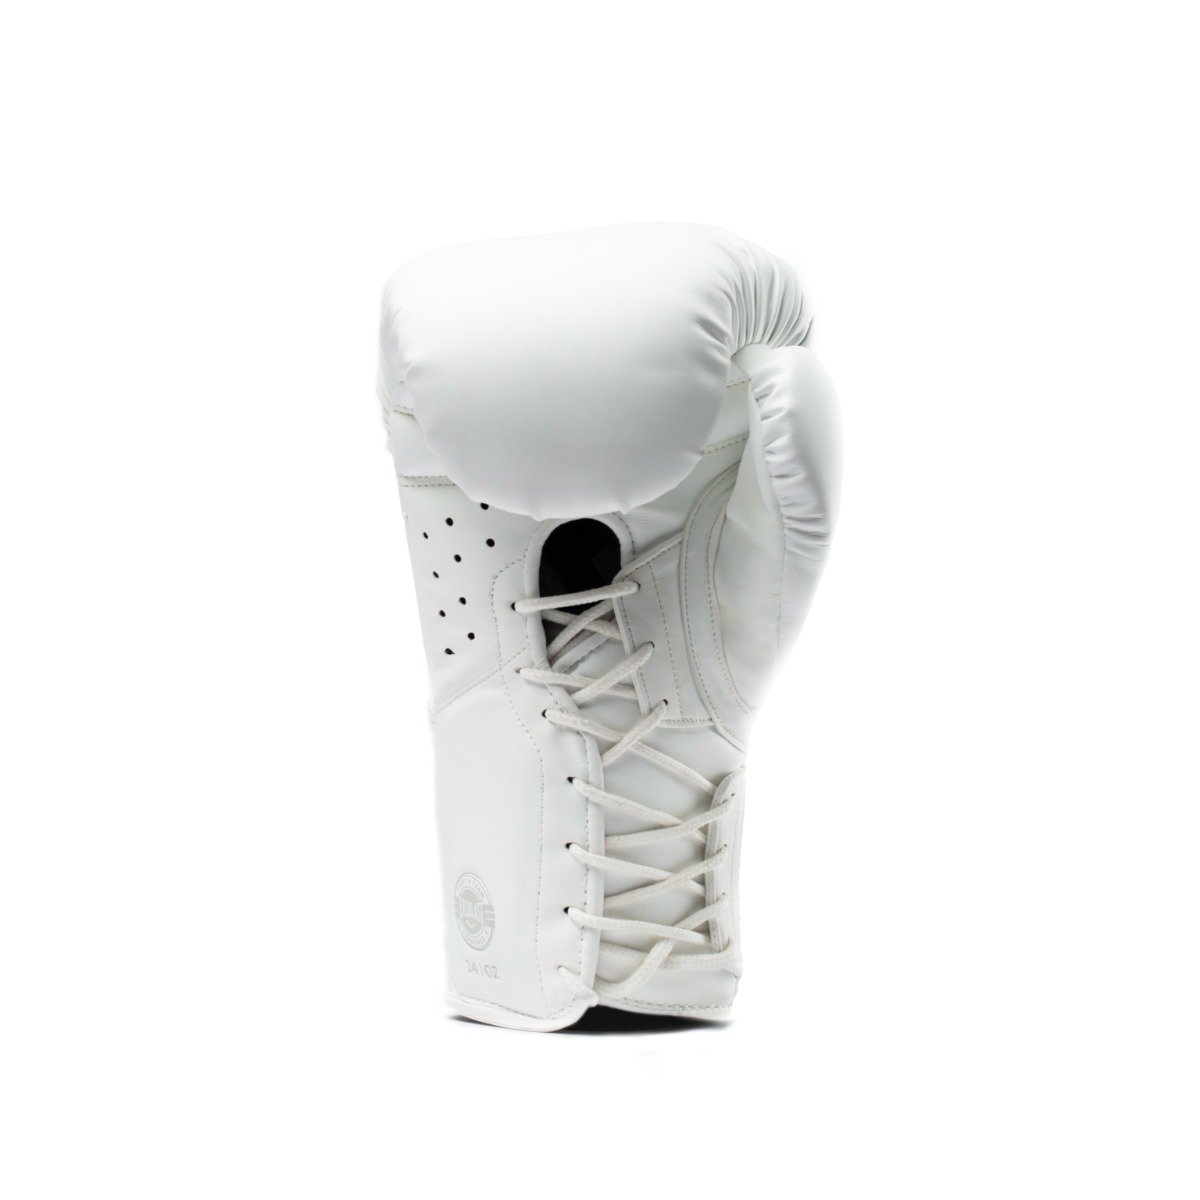 Elite 2 Laced Pro Boxing Gloves